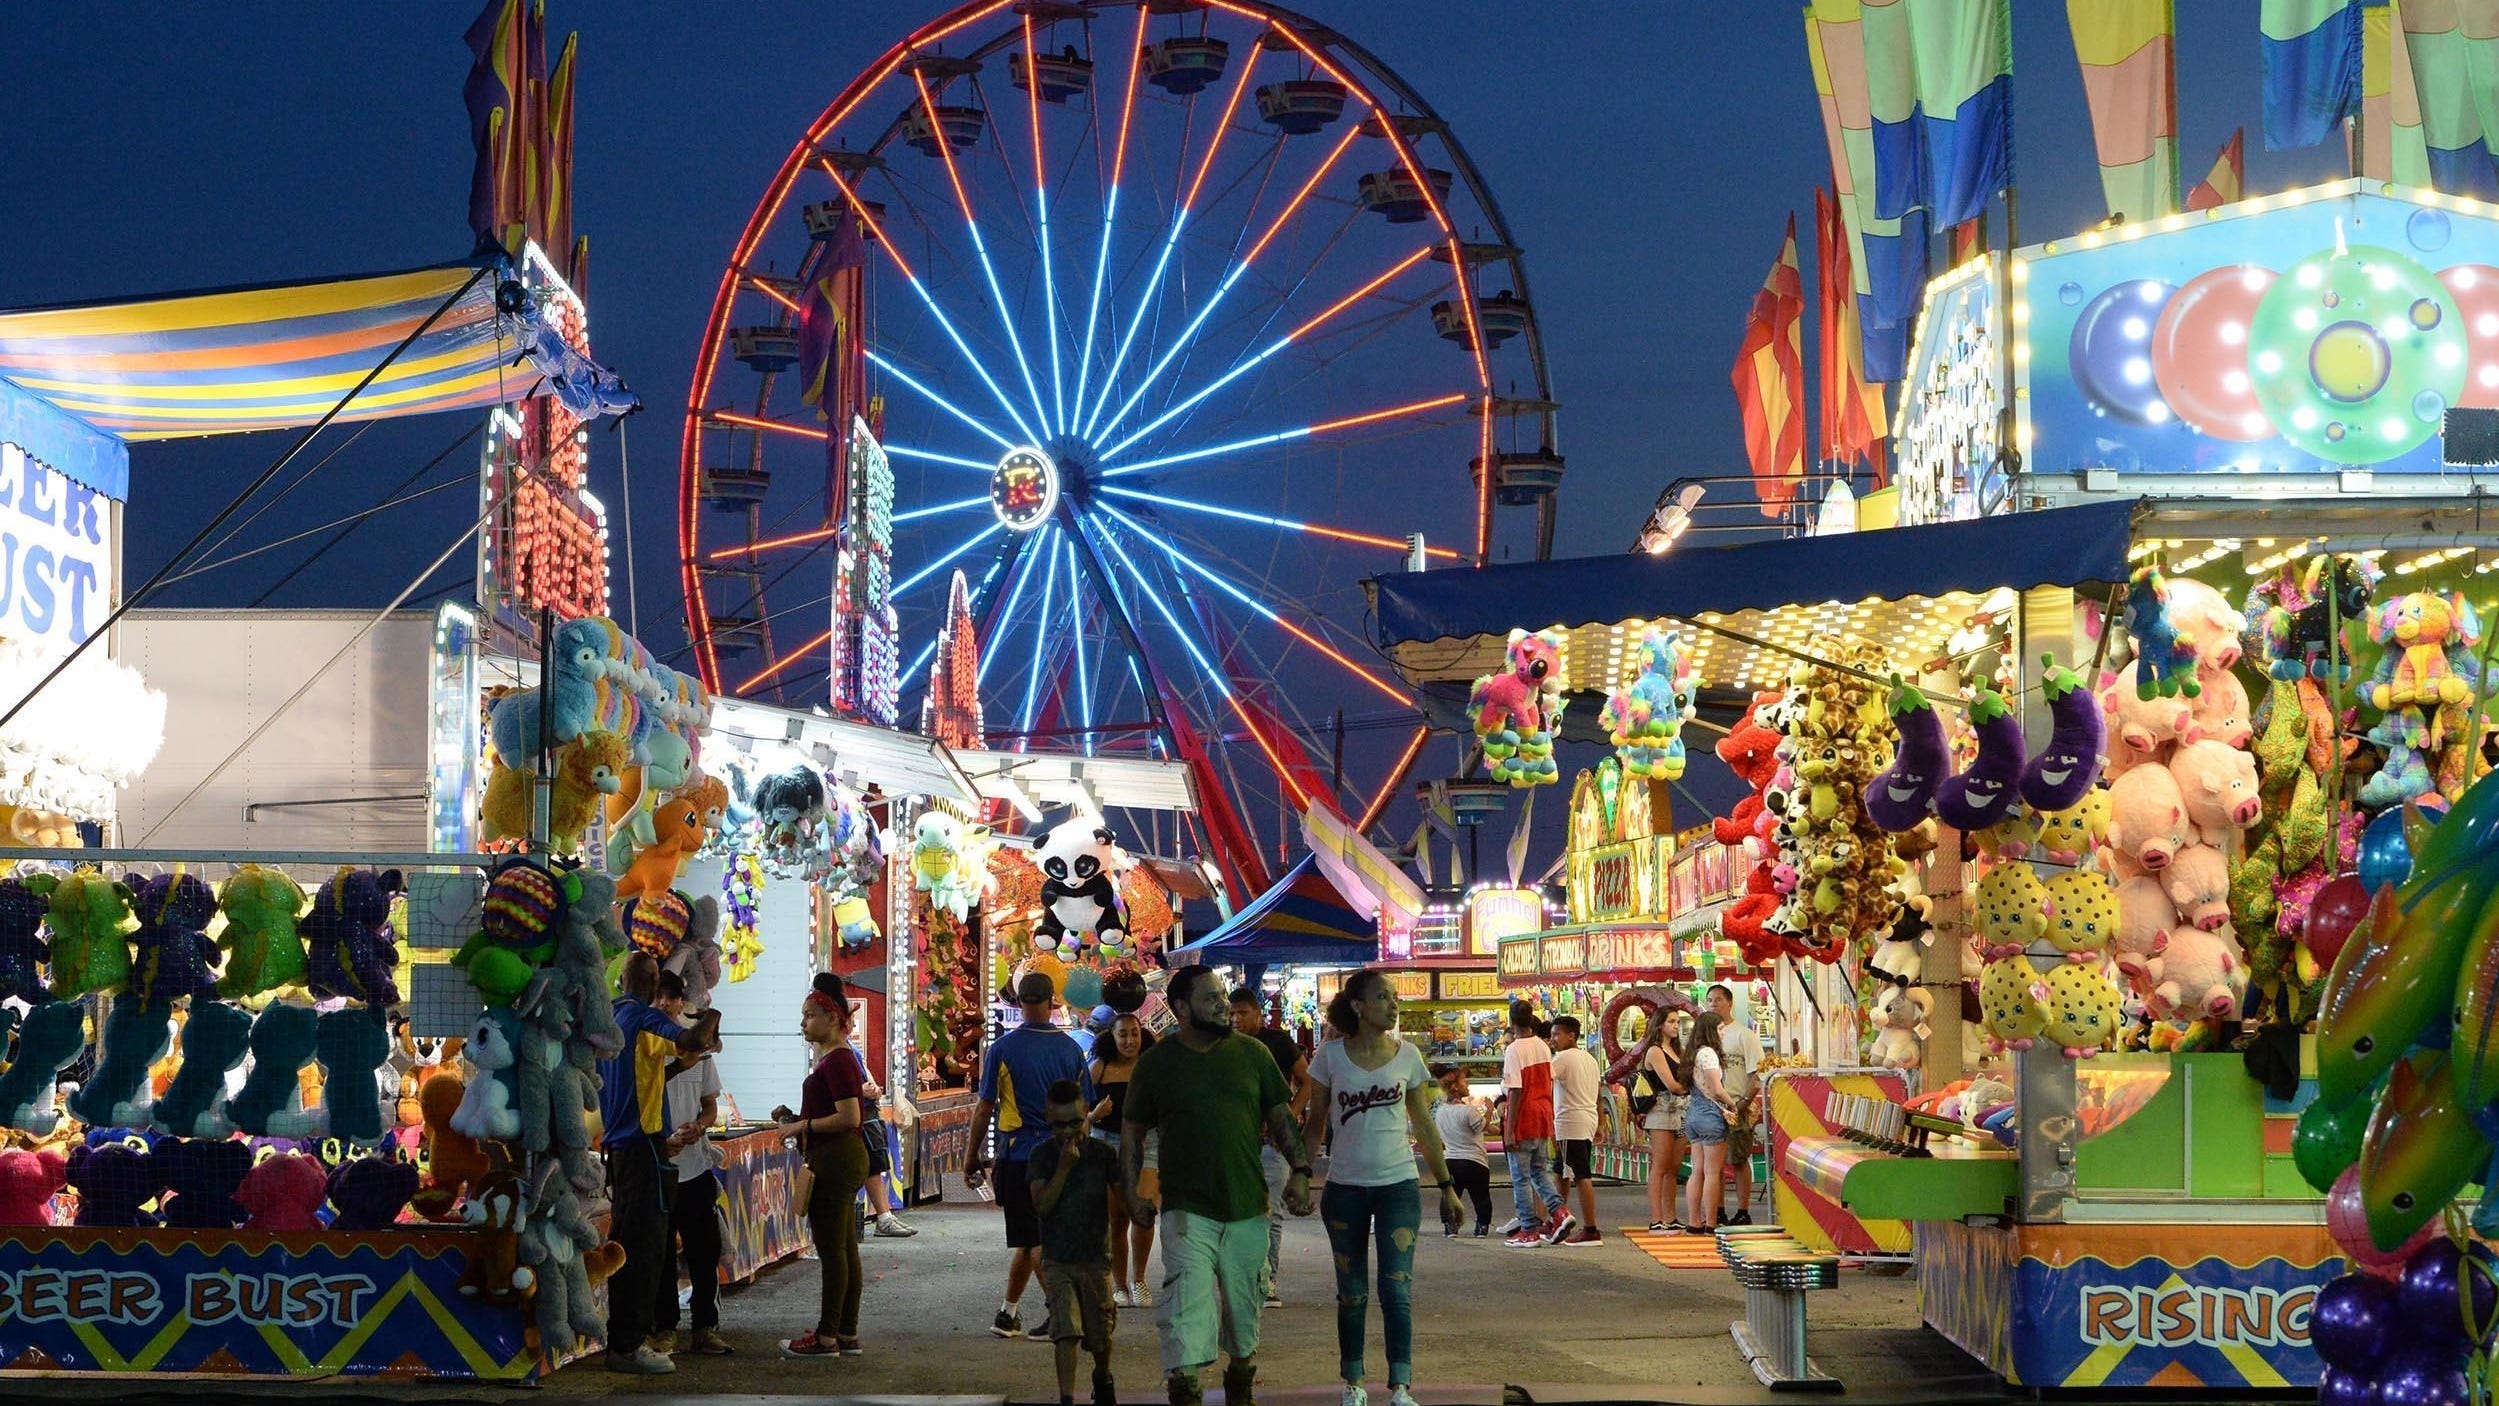 Brockton Fair canceled for second straight year due to COVID pandemic